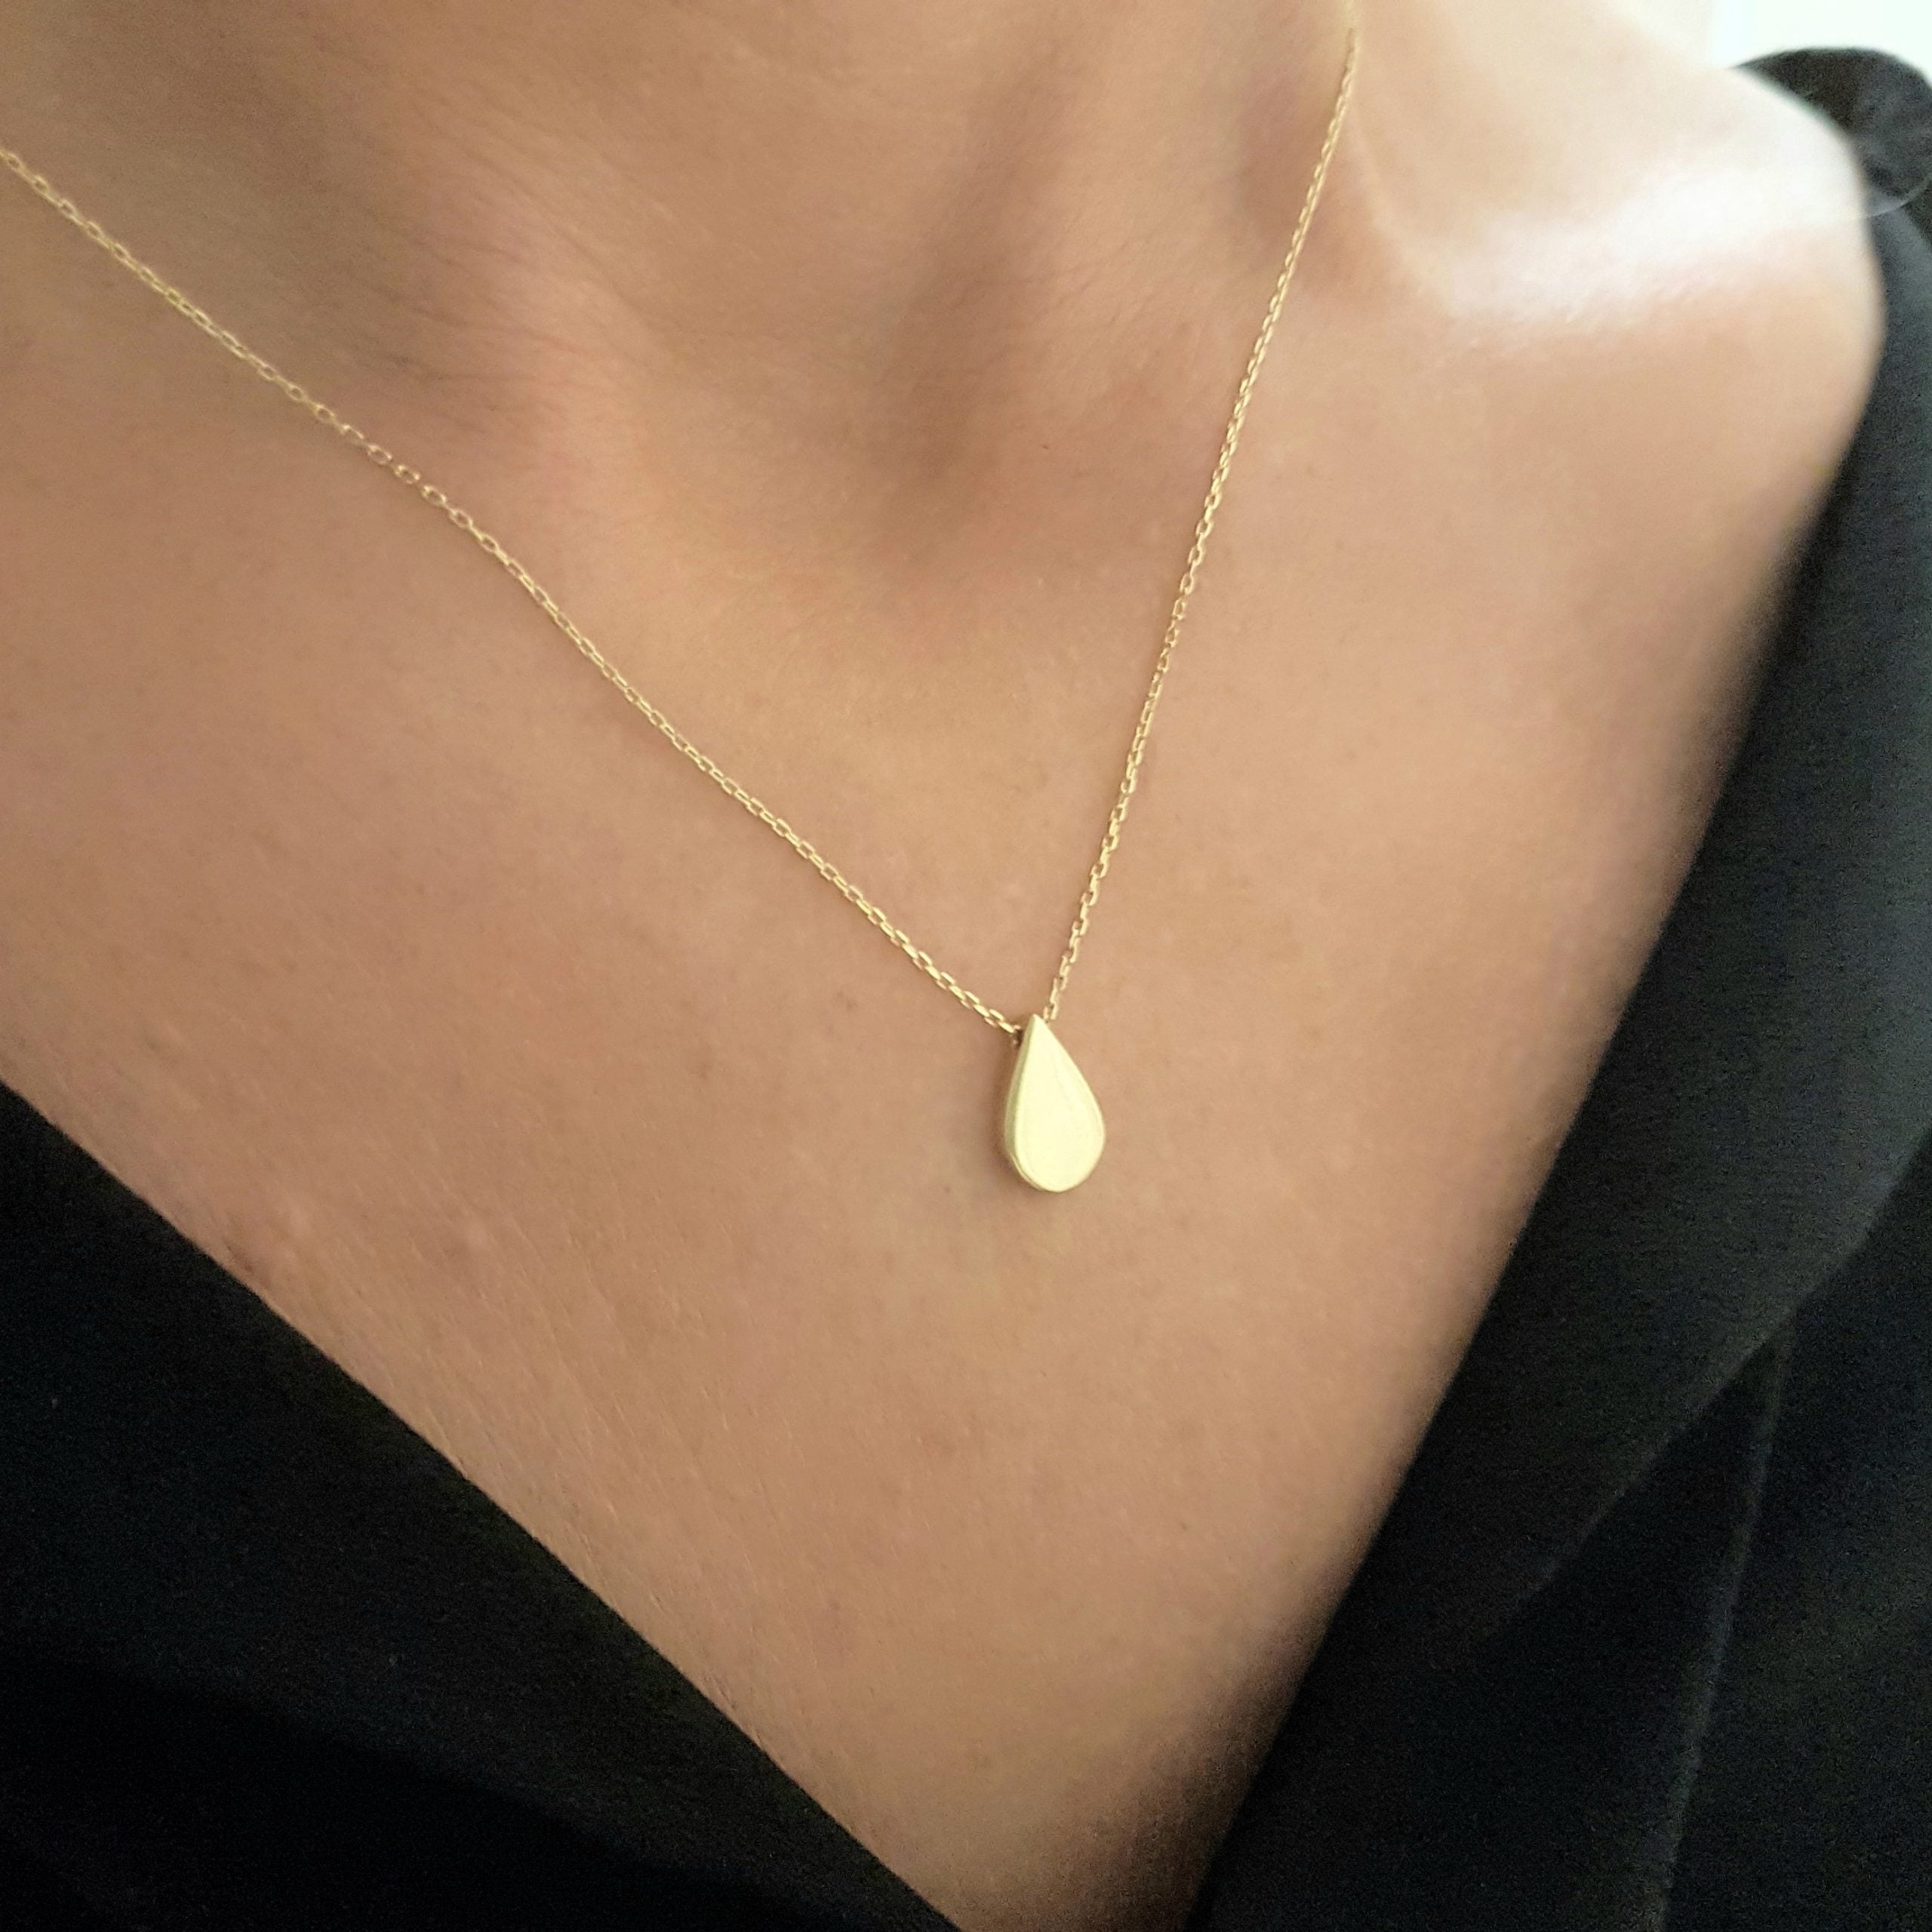 14K Real Solid Gold Teardrop Design Cute Charm Dainty Delicate Tiny Trendy Pendant Necklace Best Birthday Gift For Women Girlfriend Scaled 